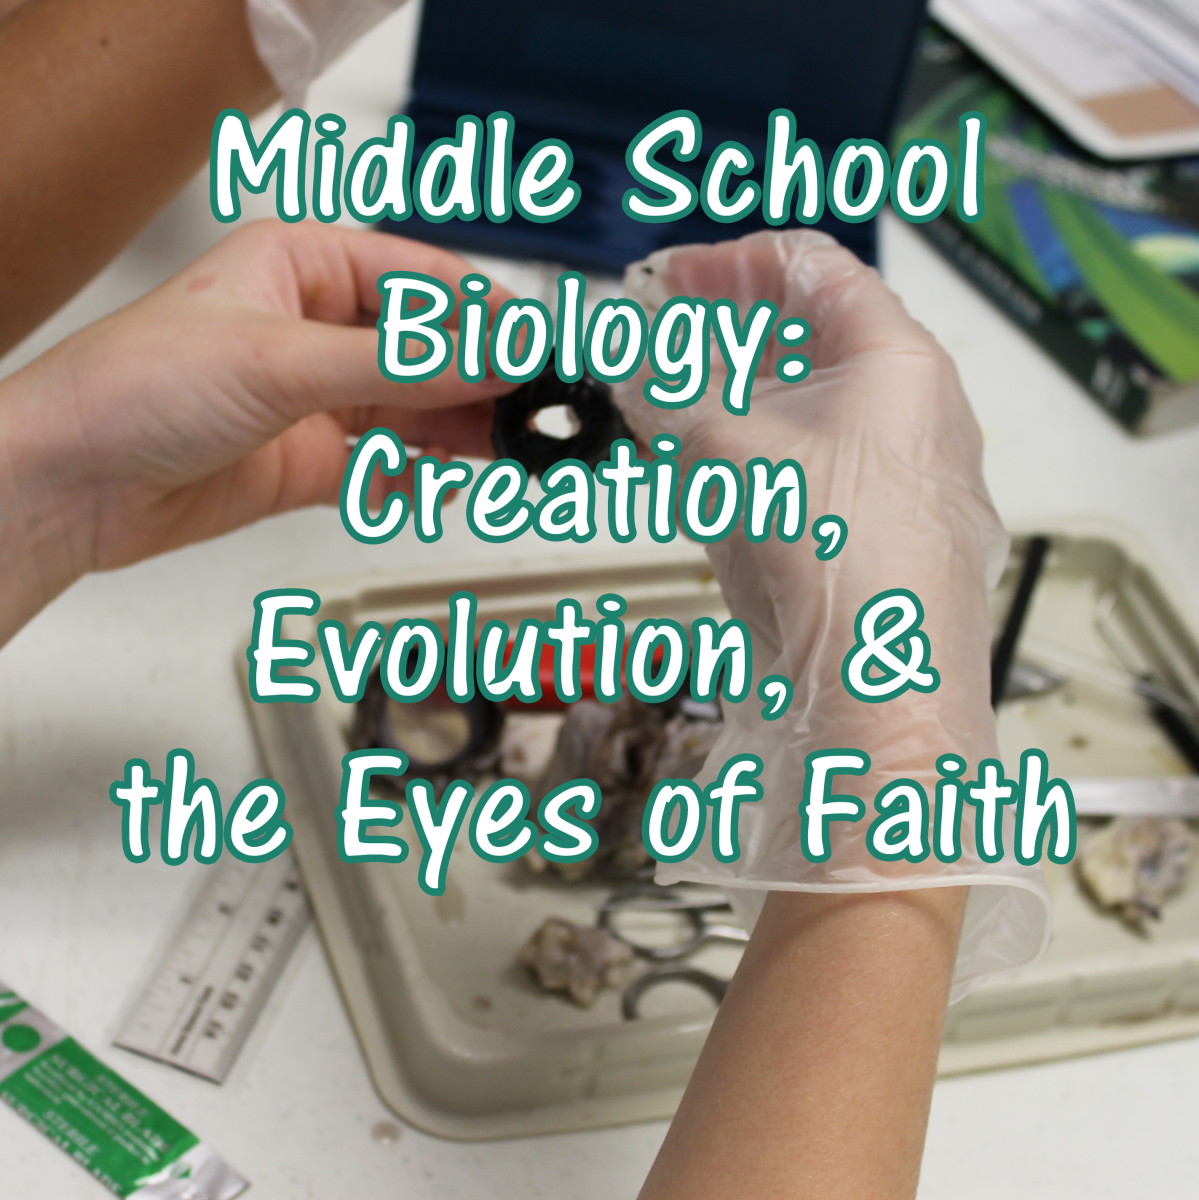 Middle School Biology Lesson on Creation Science and Evolution from a Young Earth Christian Perspective